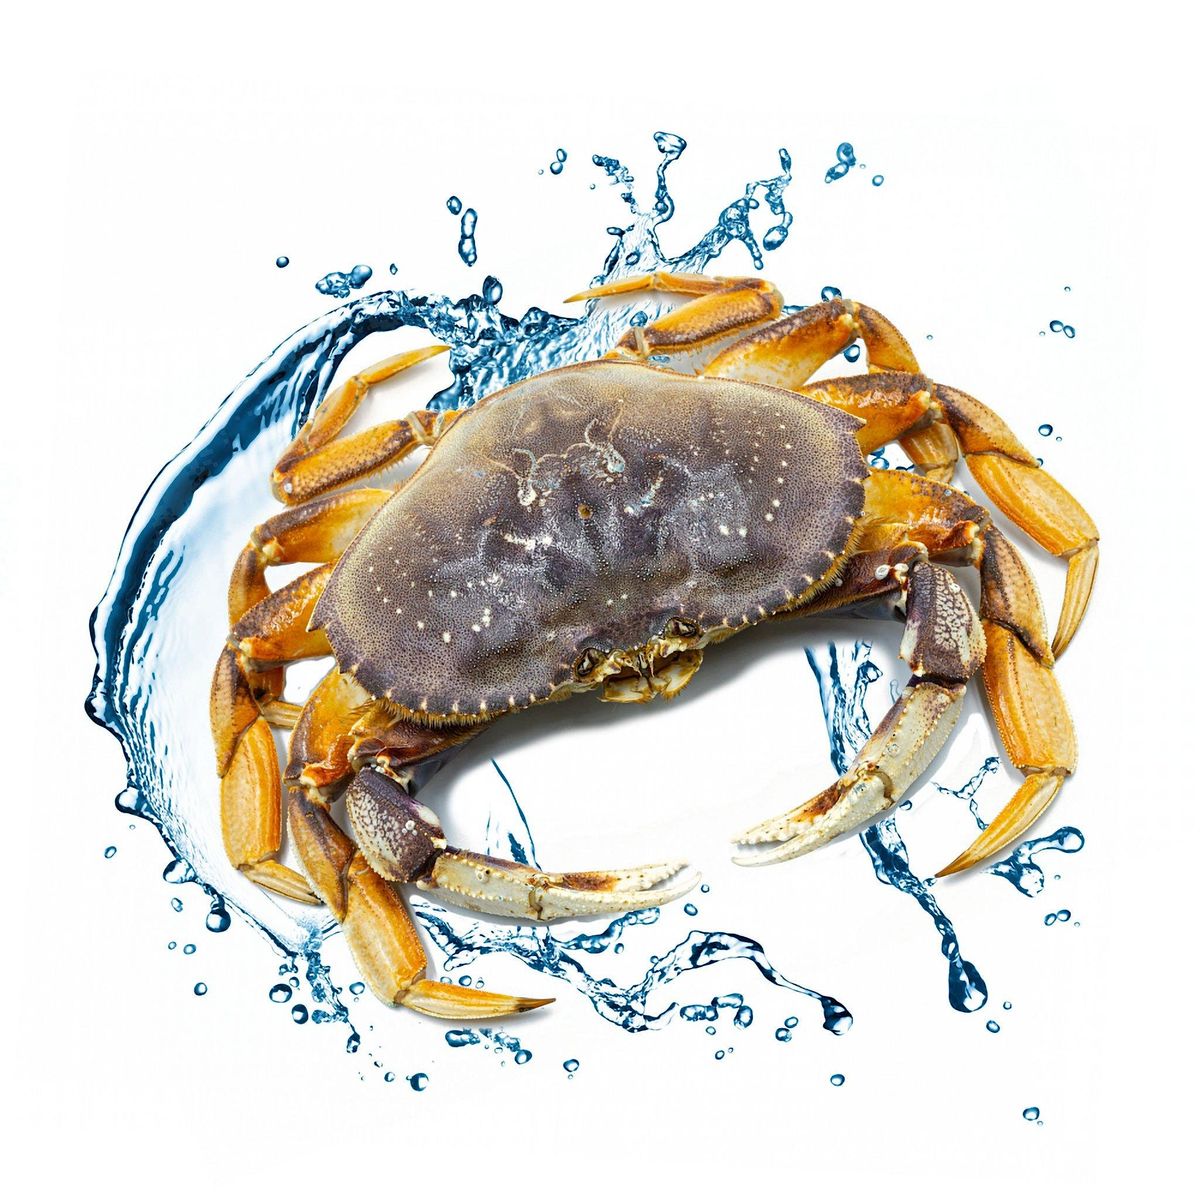 Join Our VIP Crab Club\u2122 - Reserve Your Super Fresh Dungeness Crab Order NOW